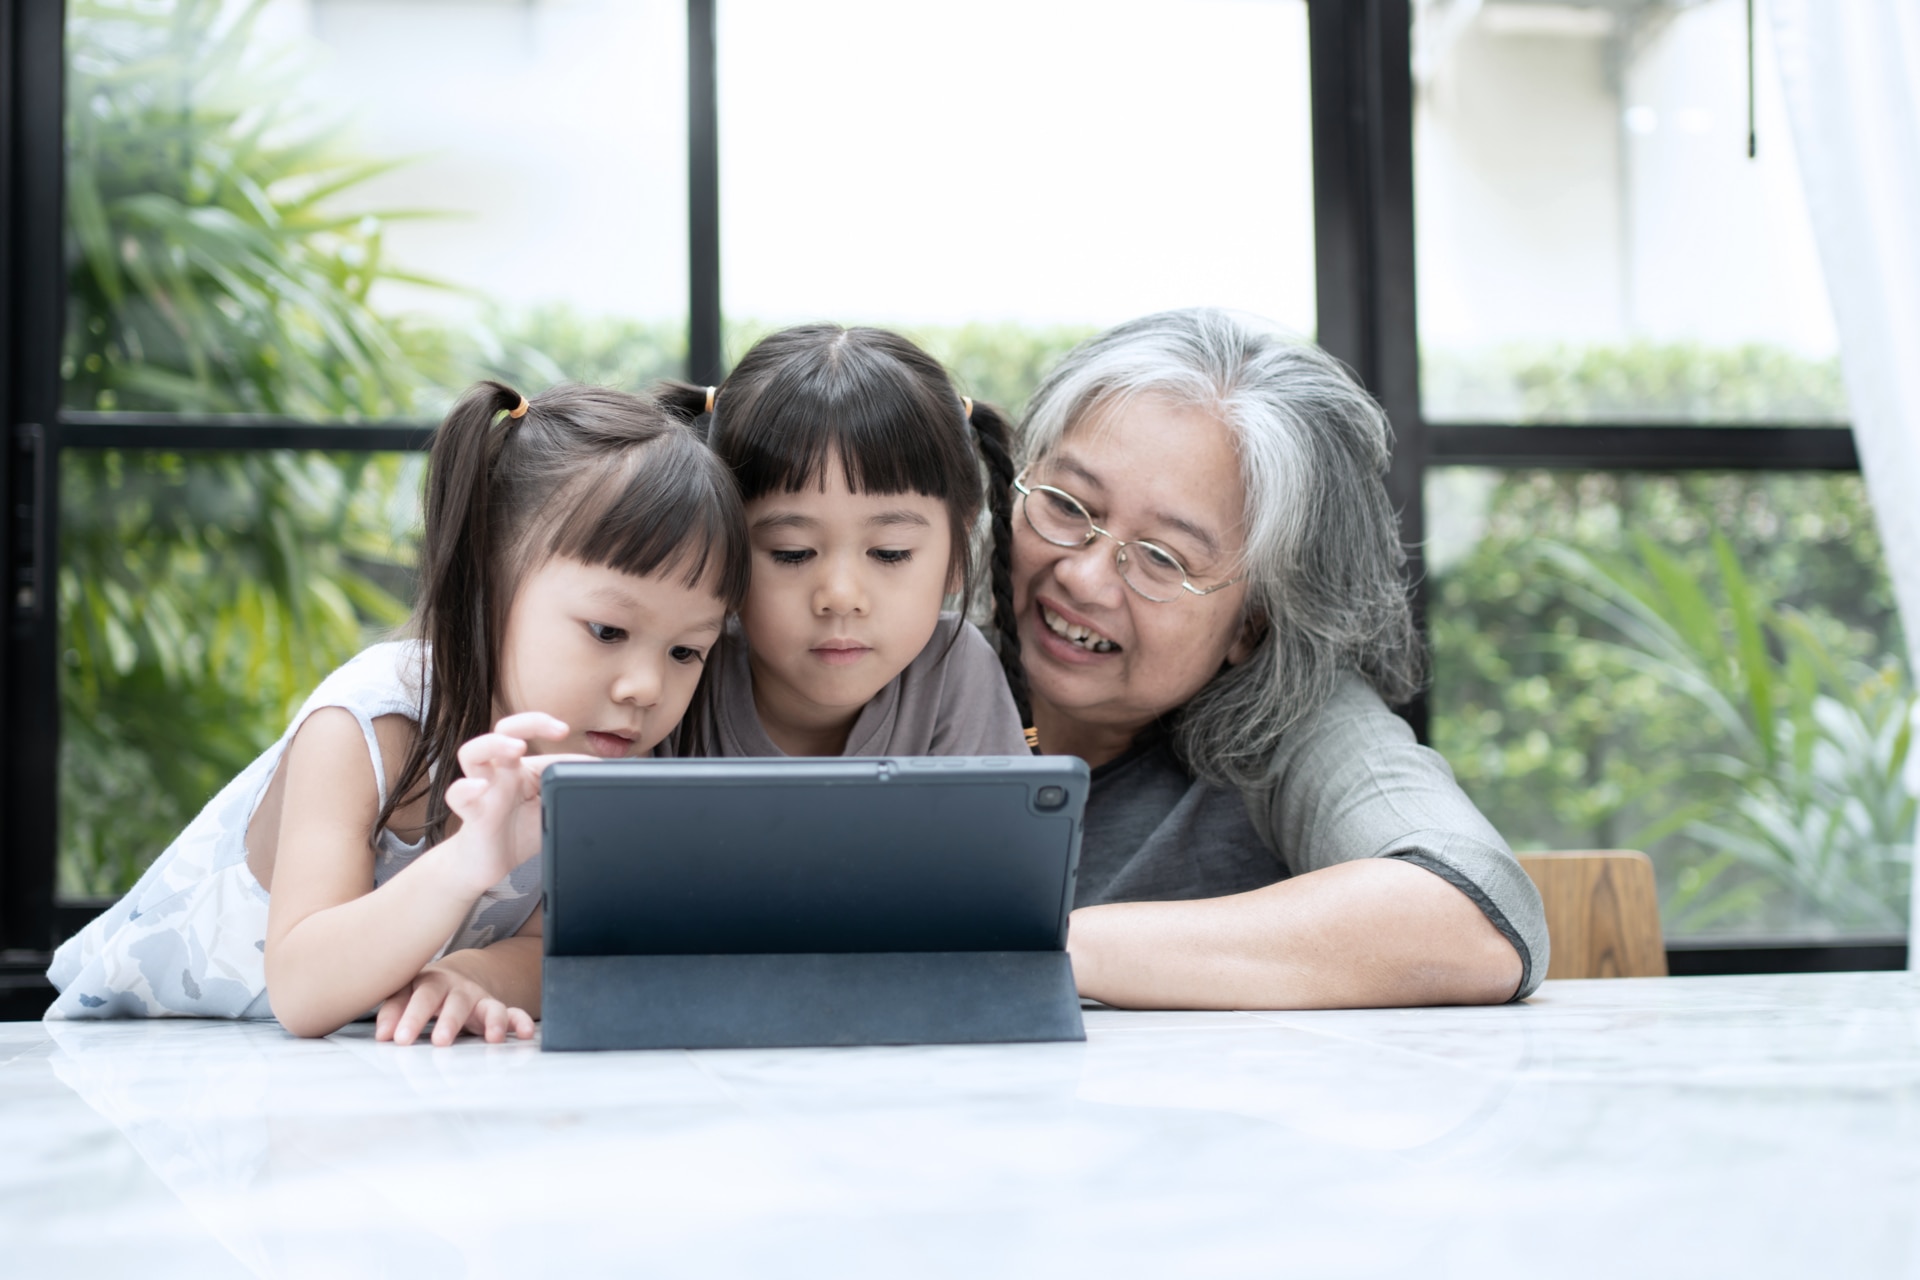 A grandmother watches her two grandchildren use a tablet.